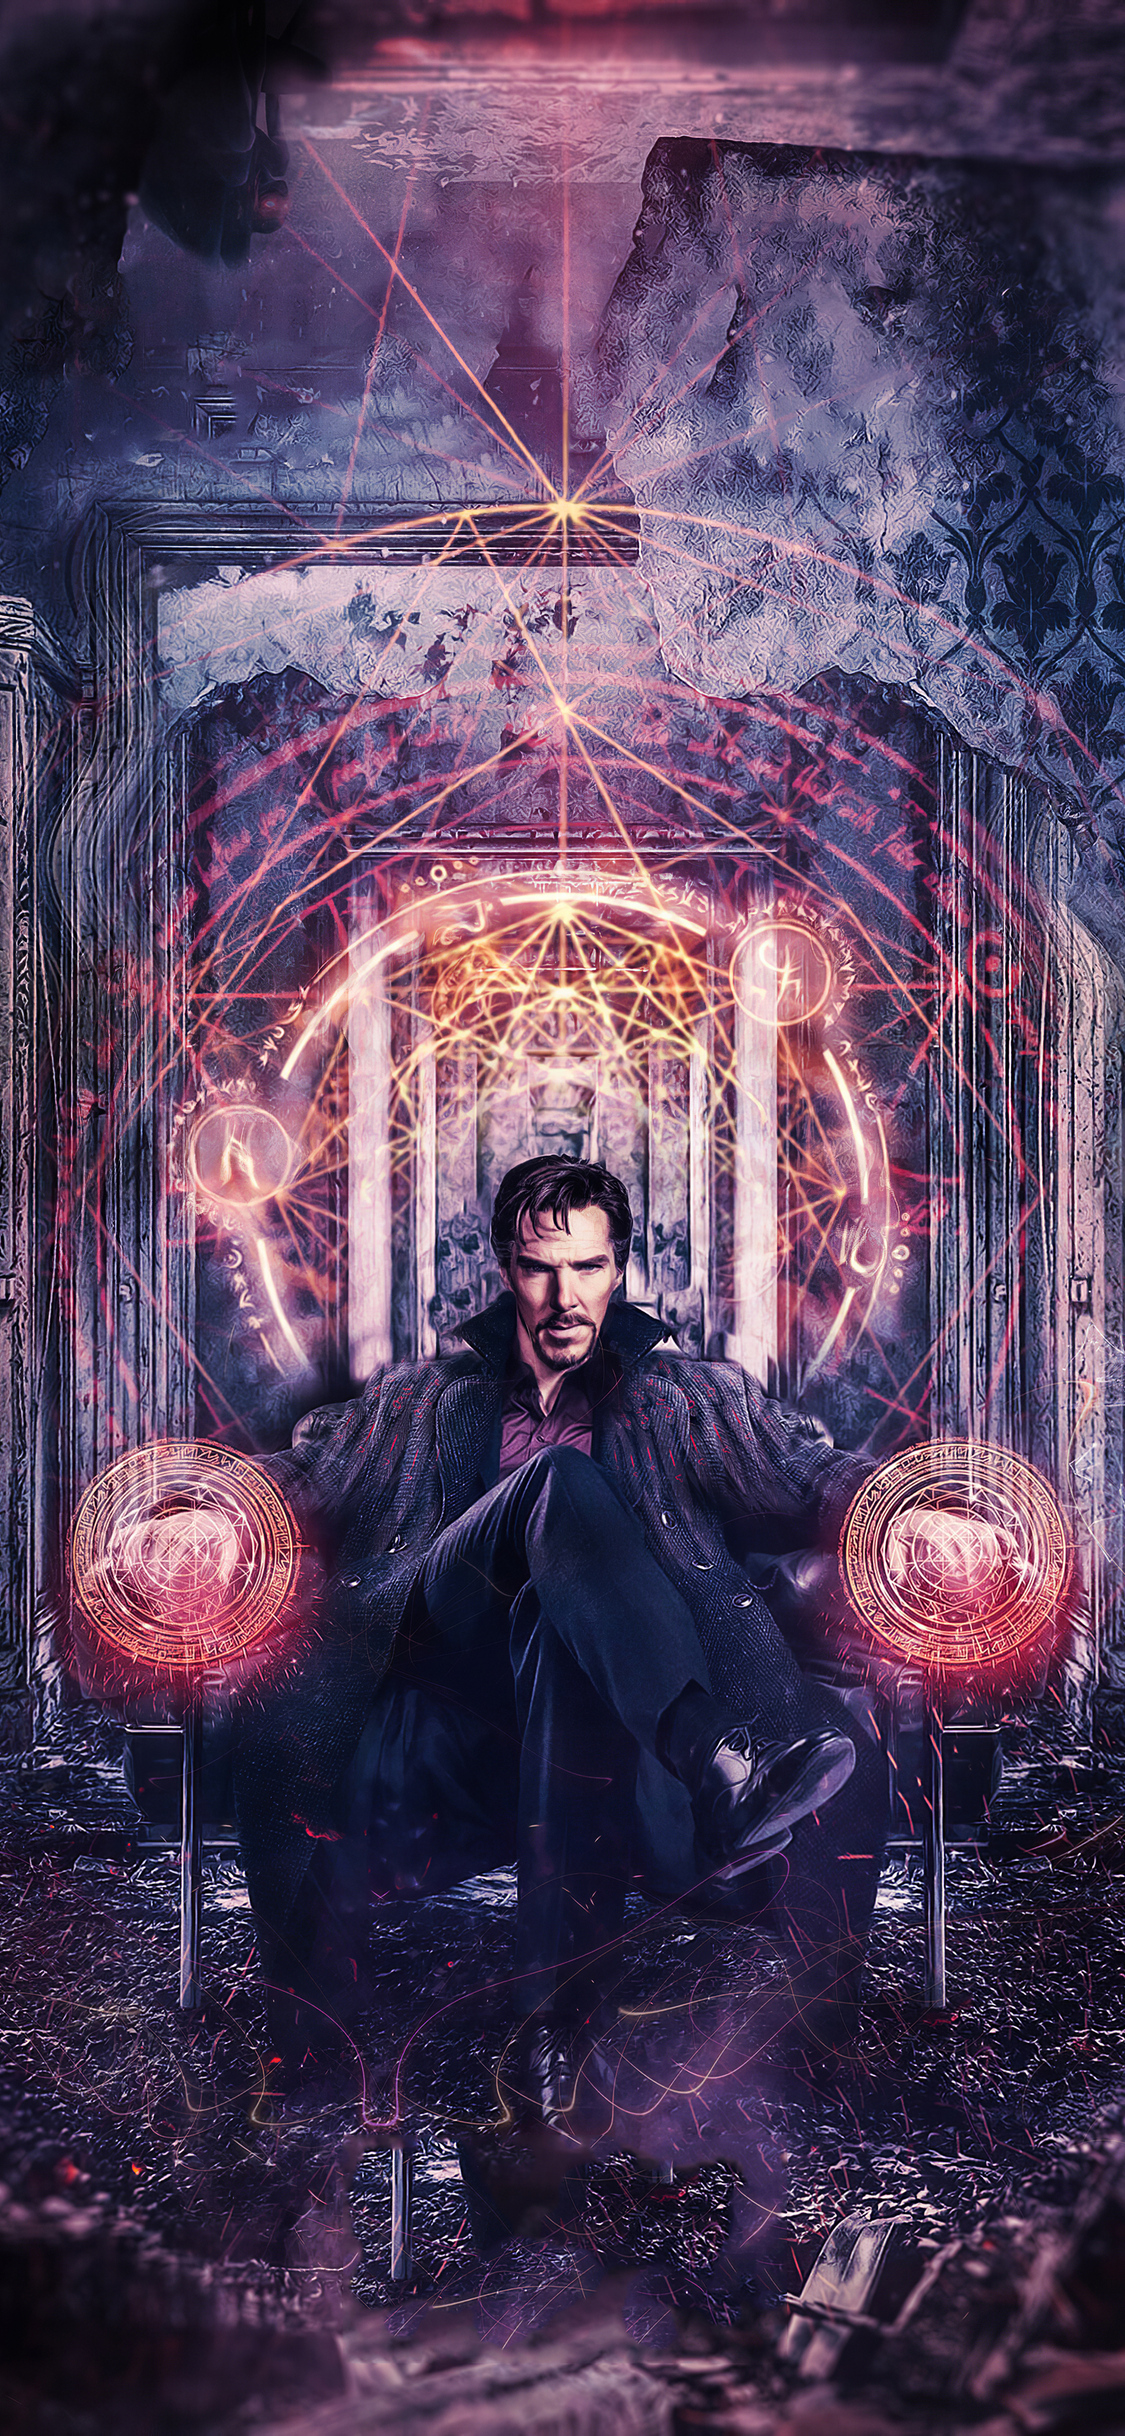 Doctor Strange in the Multiverse of Madness Wallpaper 4K 2022 Movies 7886